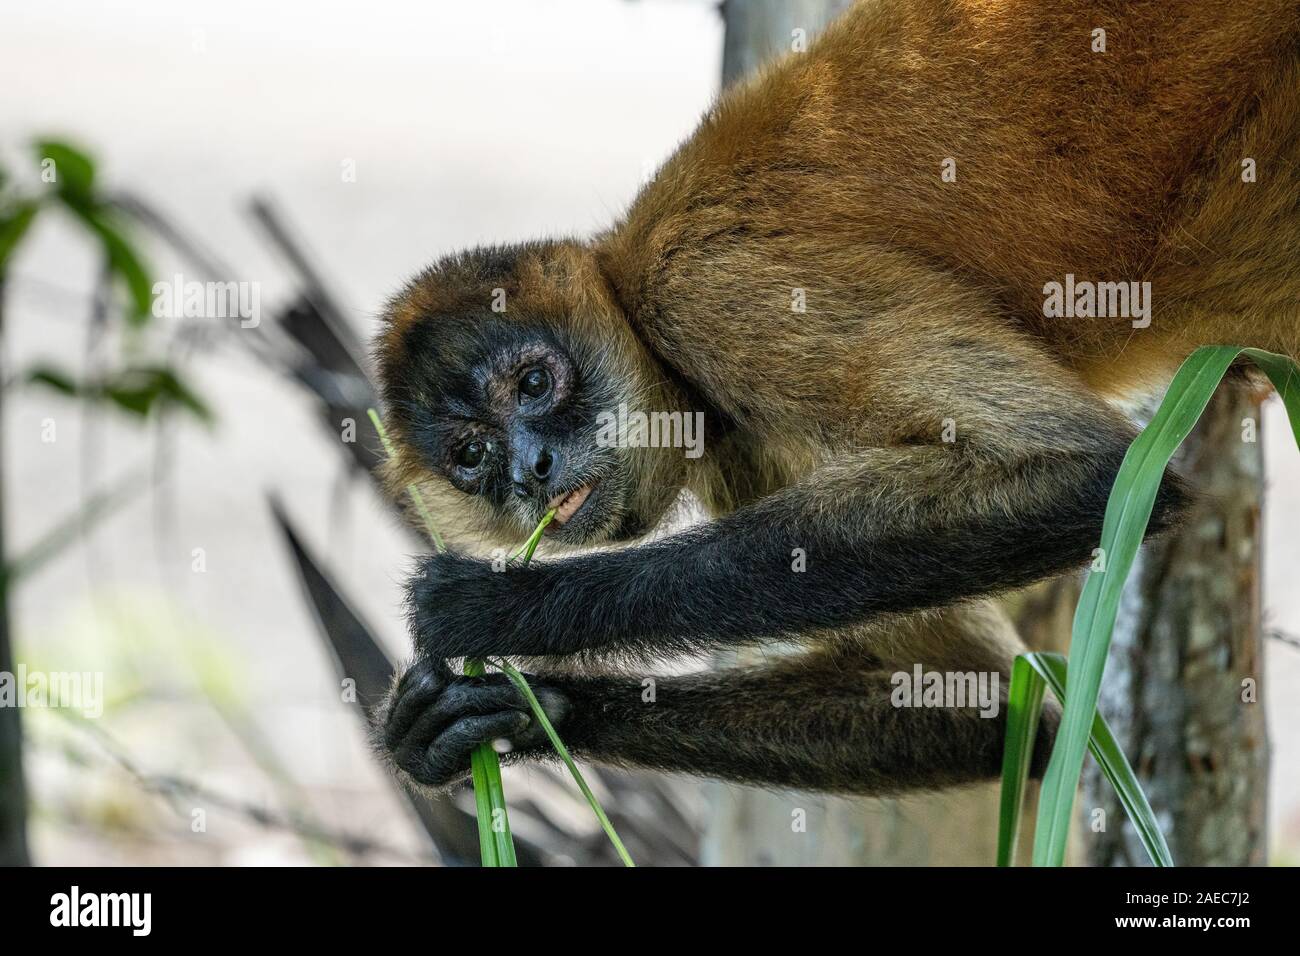 close up portrait of a Geoffroy's spider monkey (Ateles geoffroyi), also known as the black-handed spider monkey, is a species of spider monkey, a typ Stock Photo